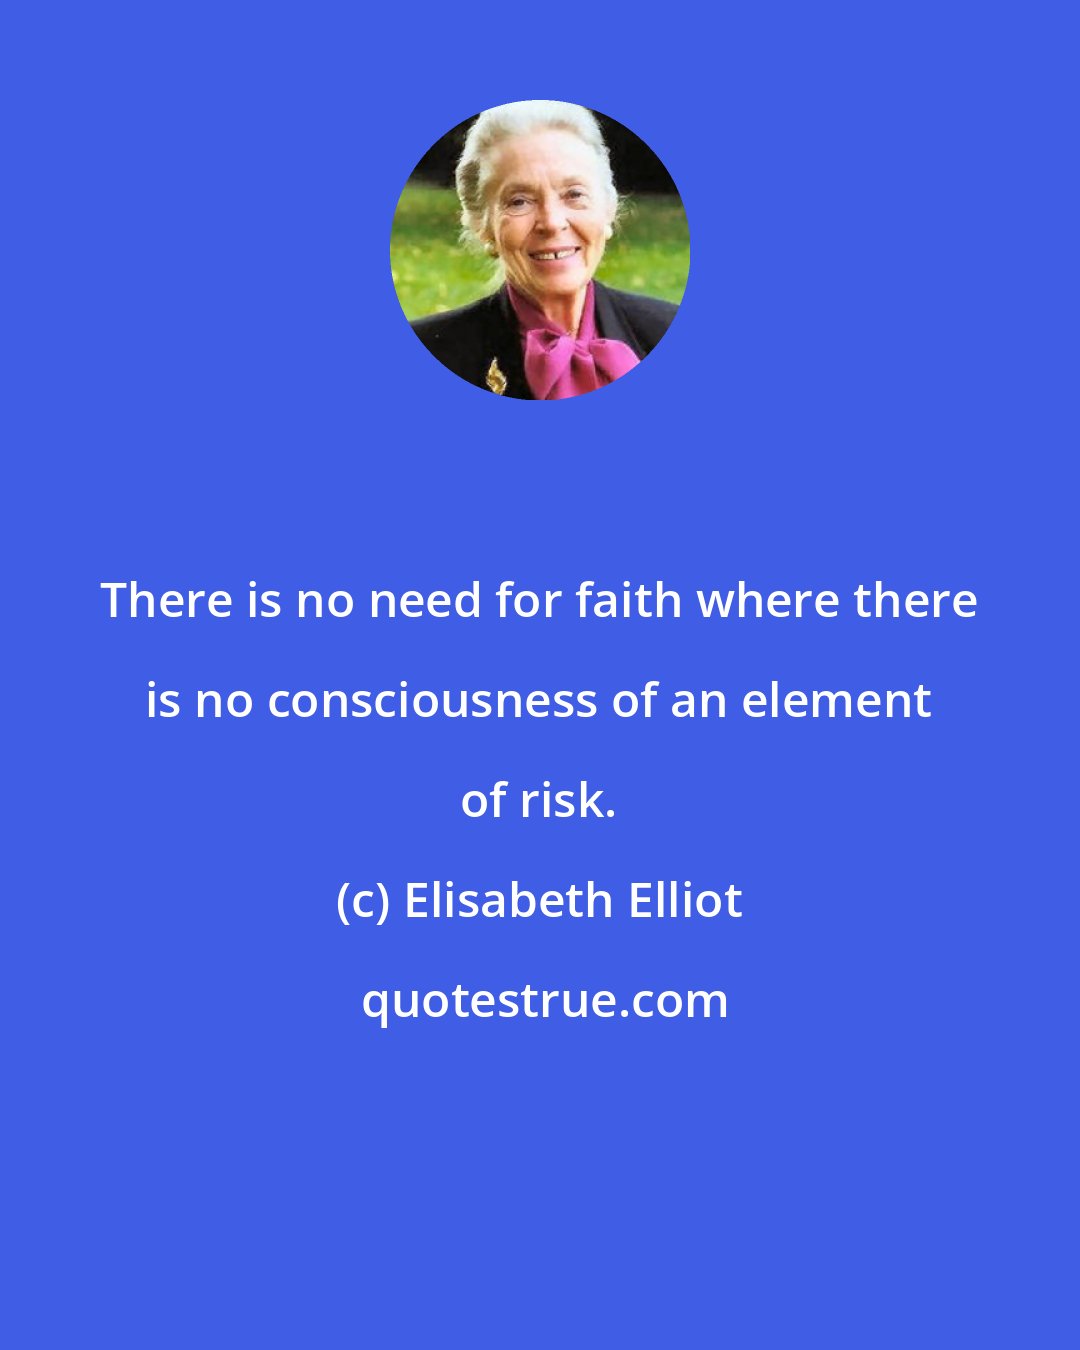 Elisabeth Elliot: There is no need for faith where there is no consciousness of an element of risk.